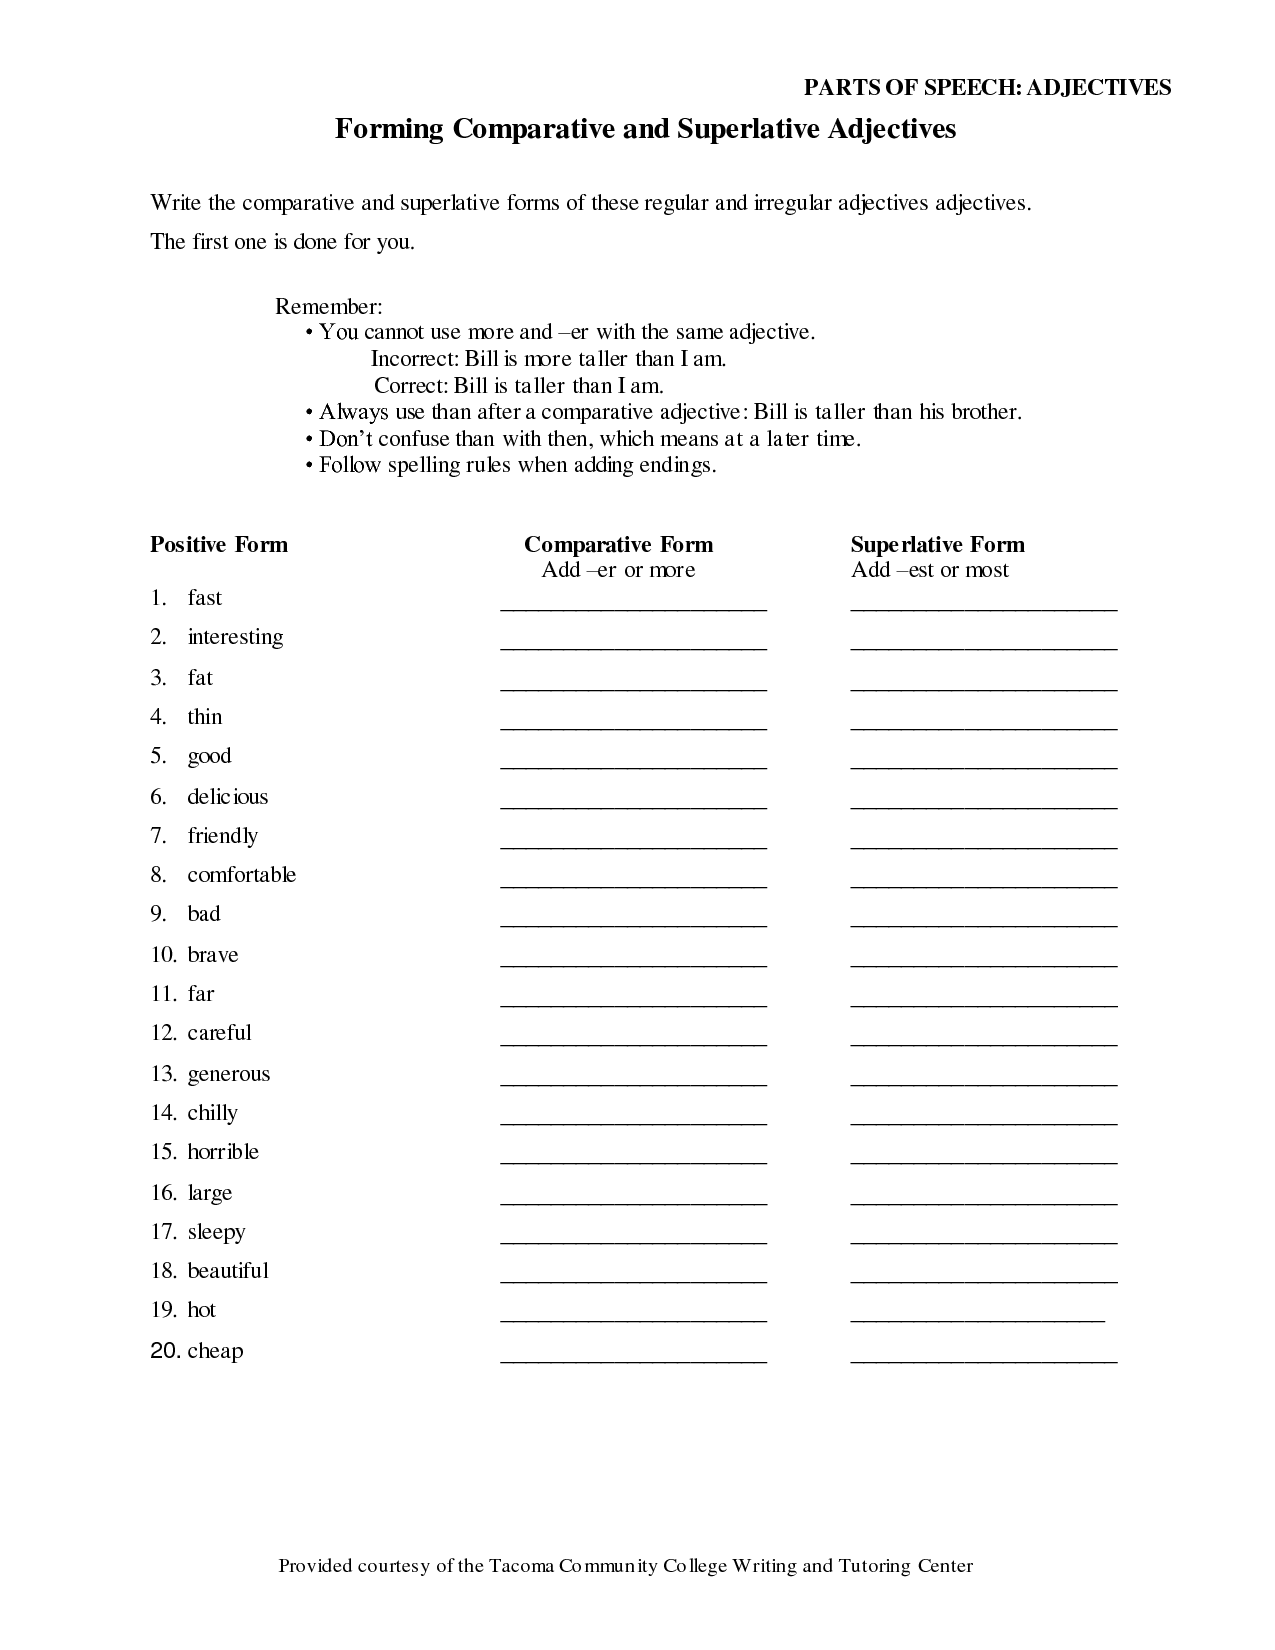 Comparative and Superlative Adjectives Worksheets Image